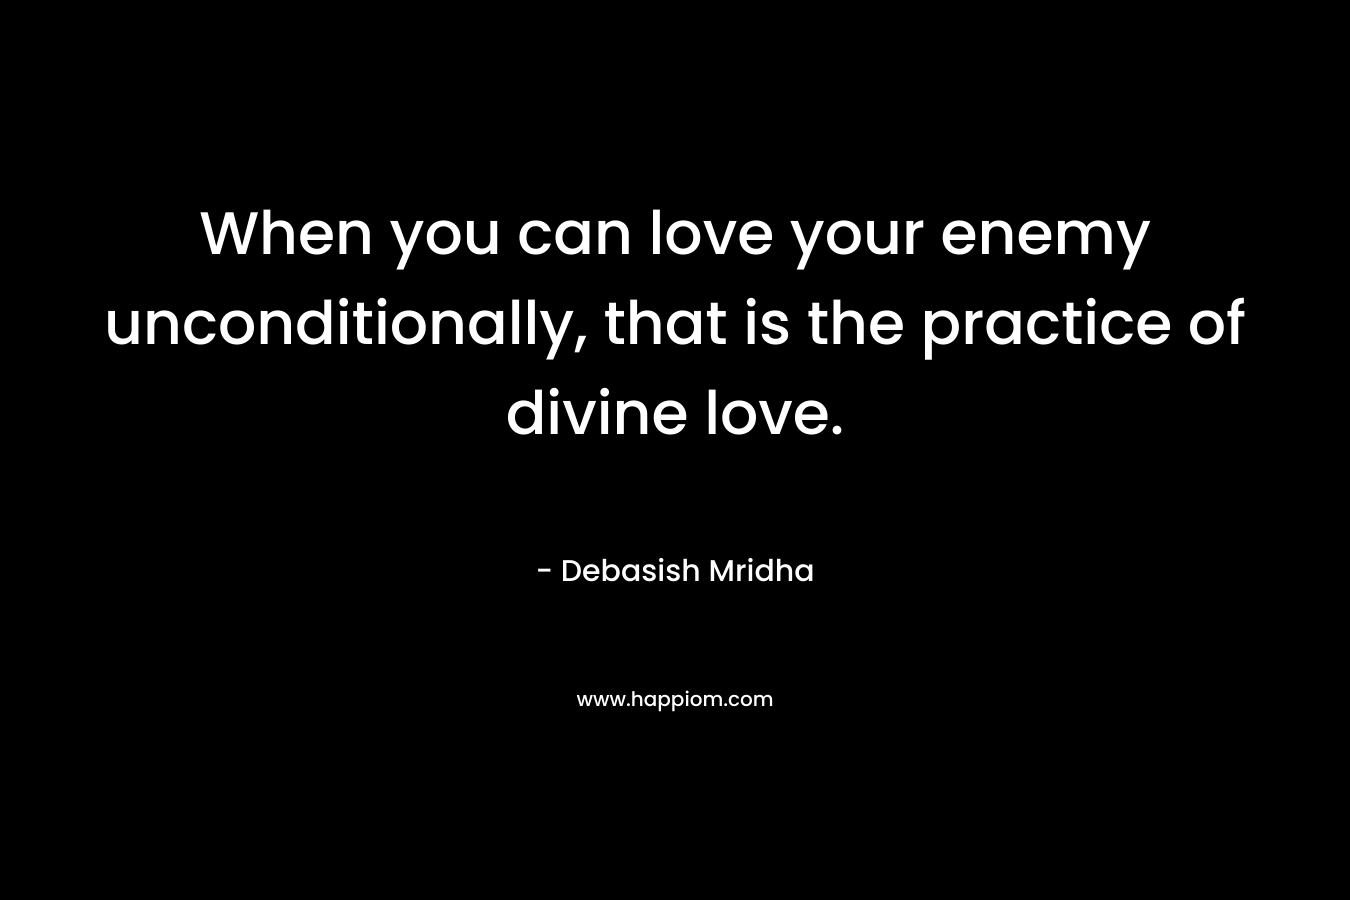 When you can love your enemy unconditionally, that is the practice of divine love.